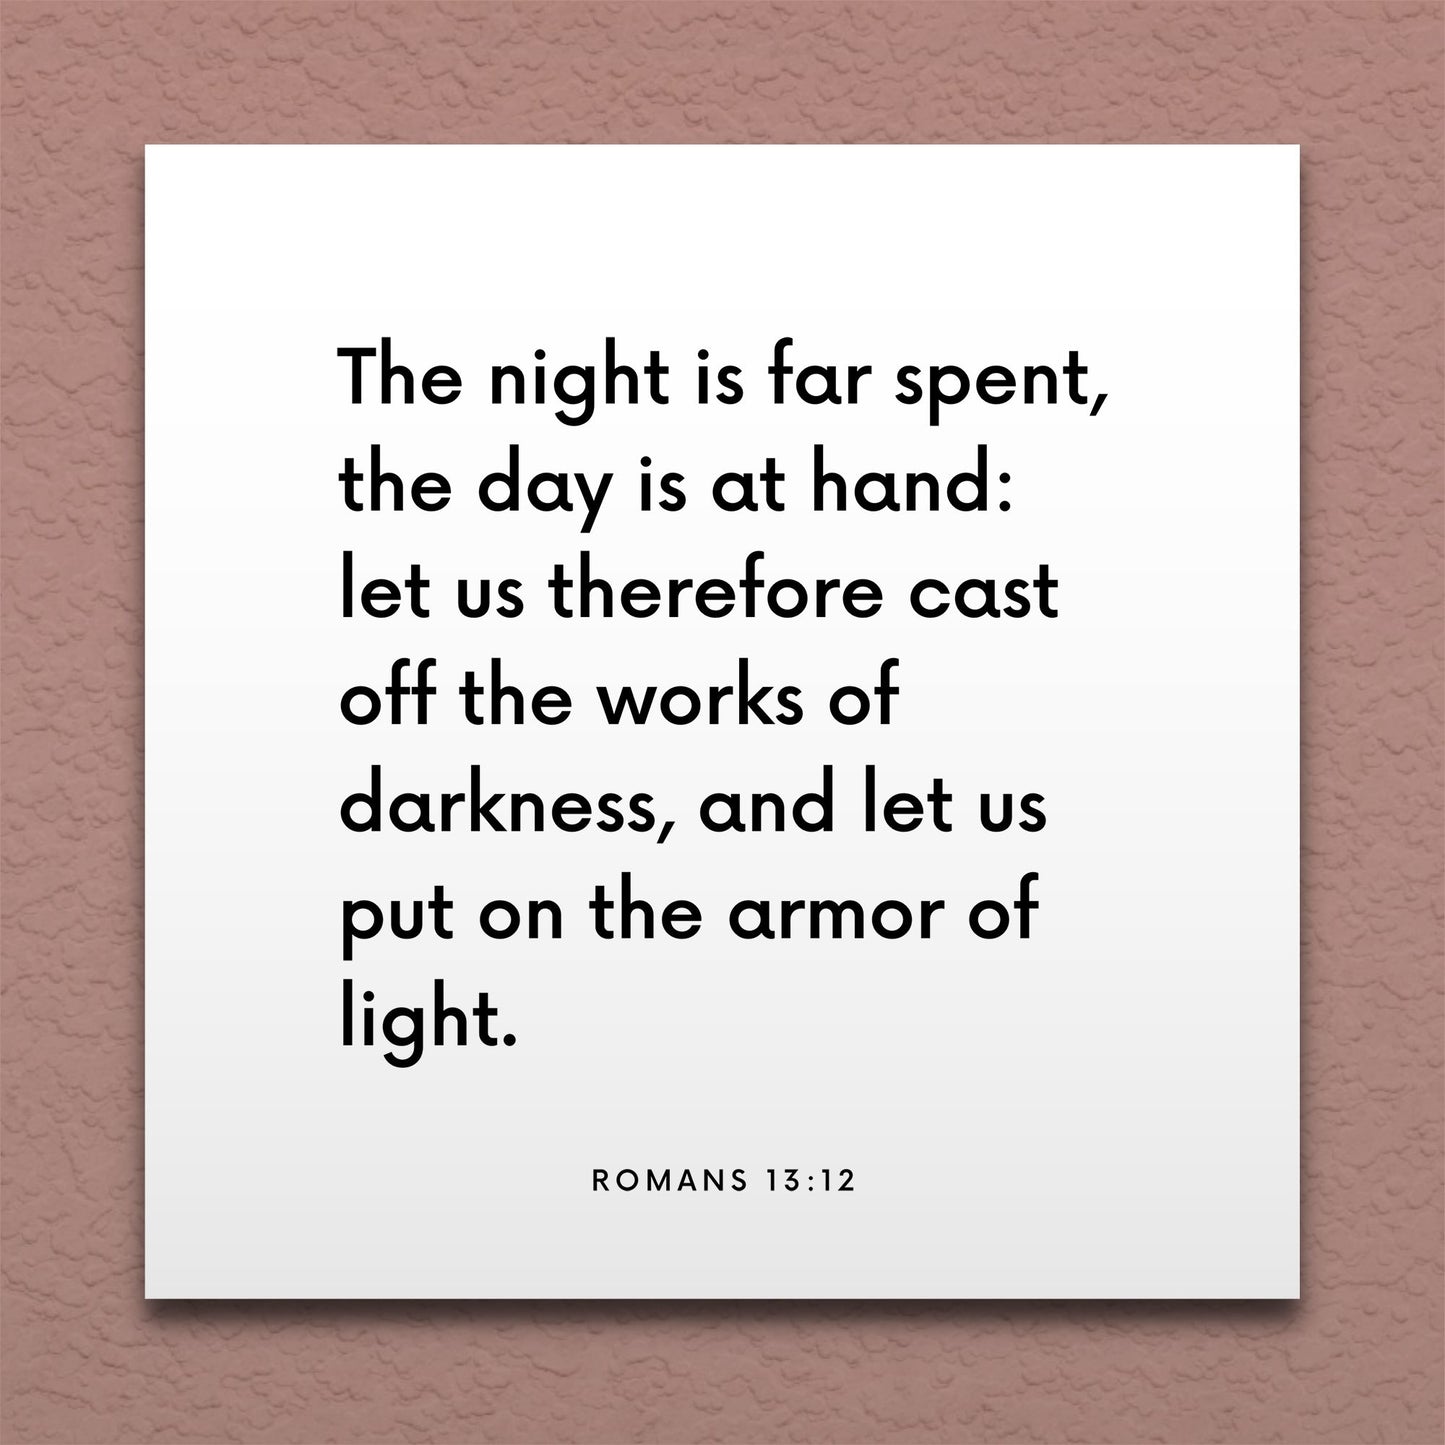 Wall-mounted scripture tile for Romans 13:12 - "Cast off the works of darkness and put on the armor of light"